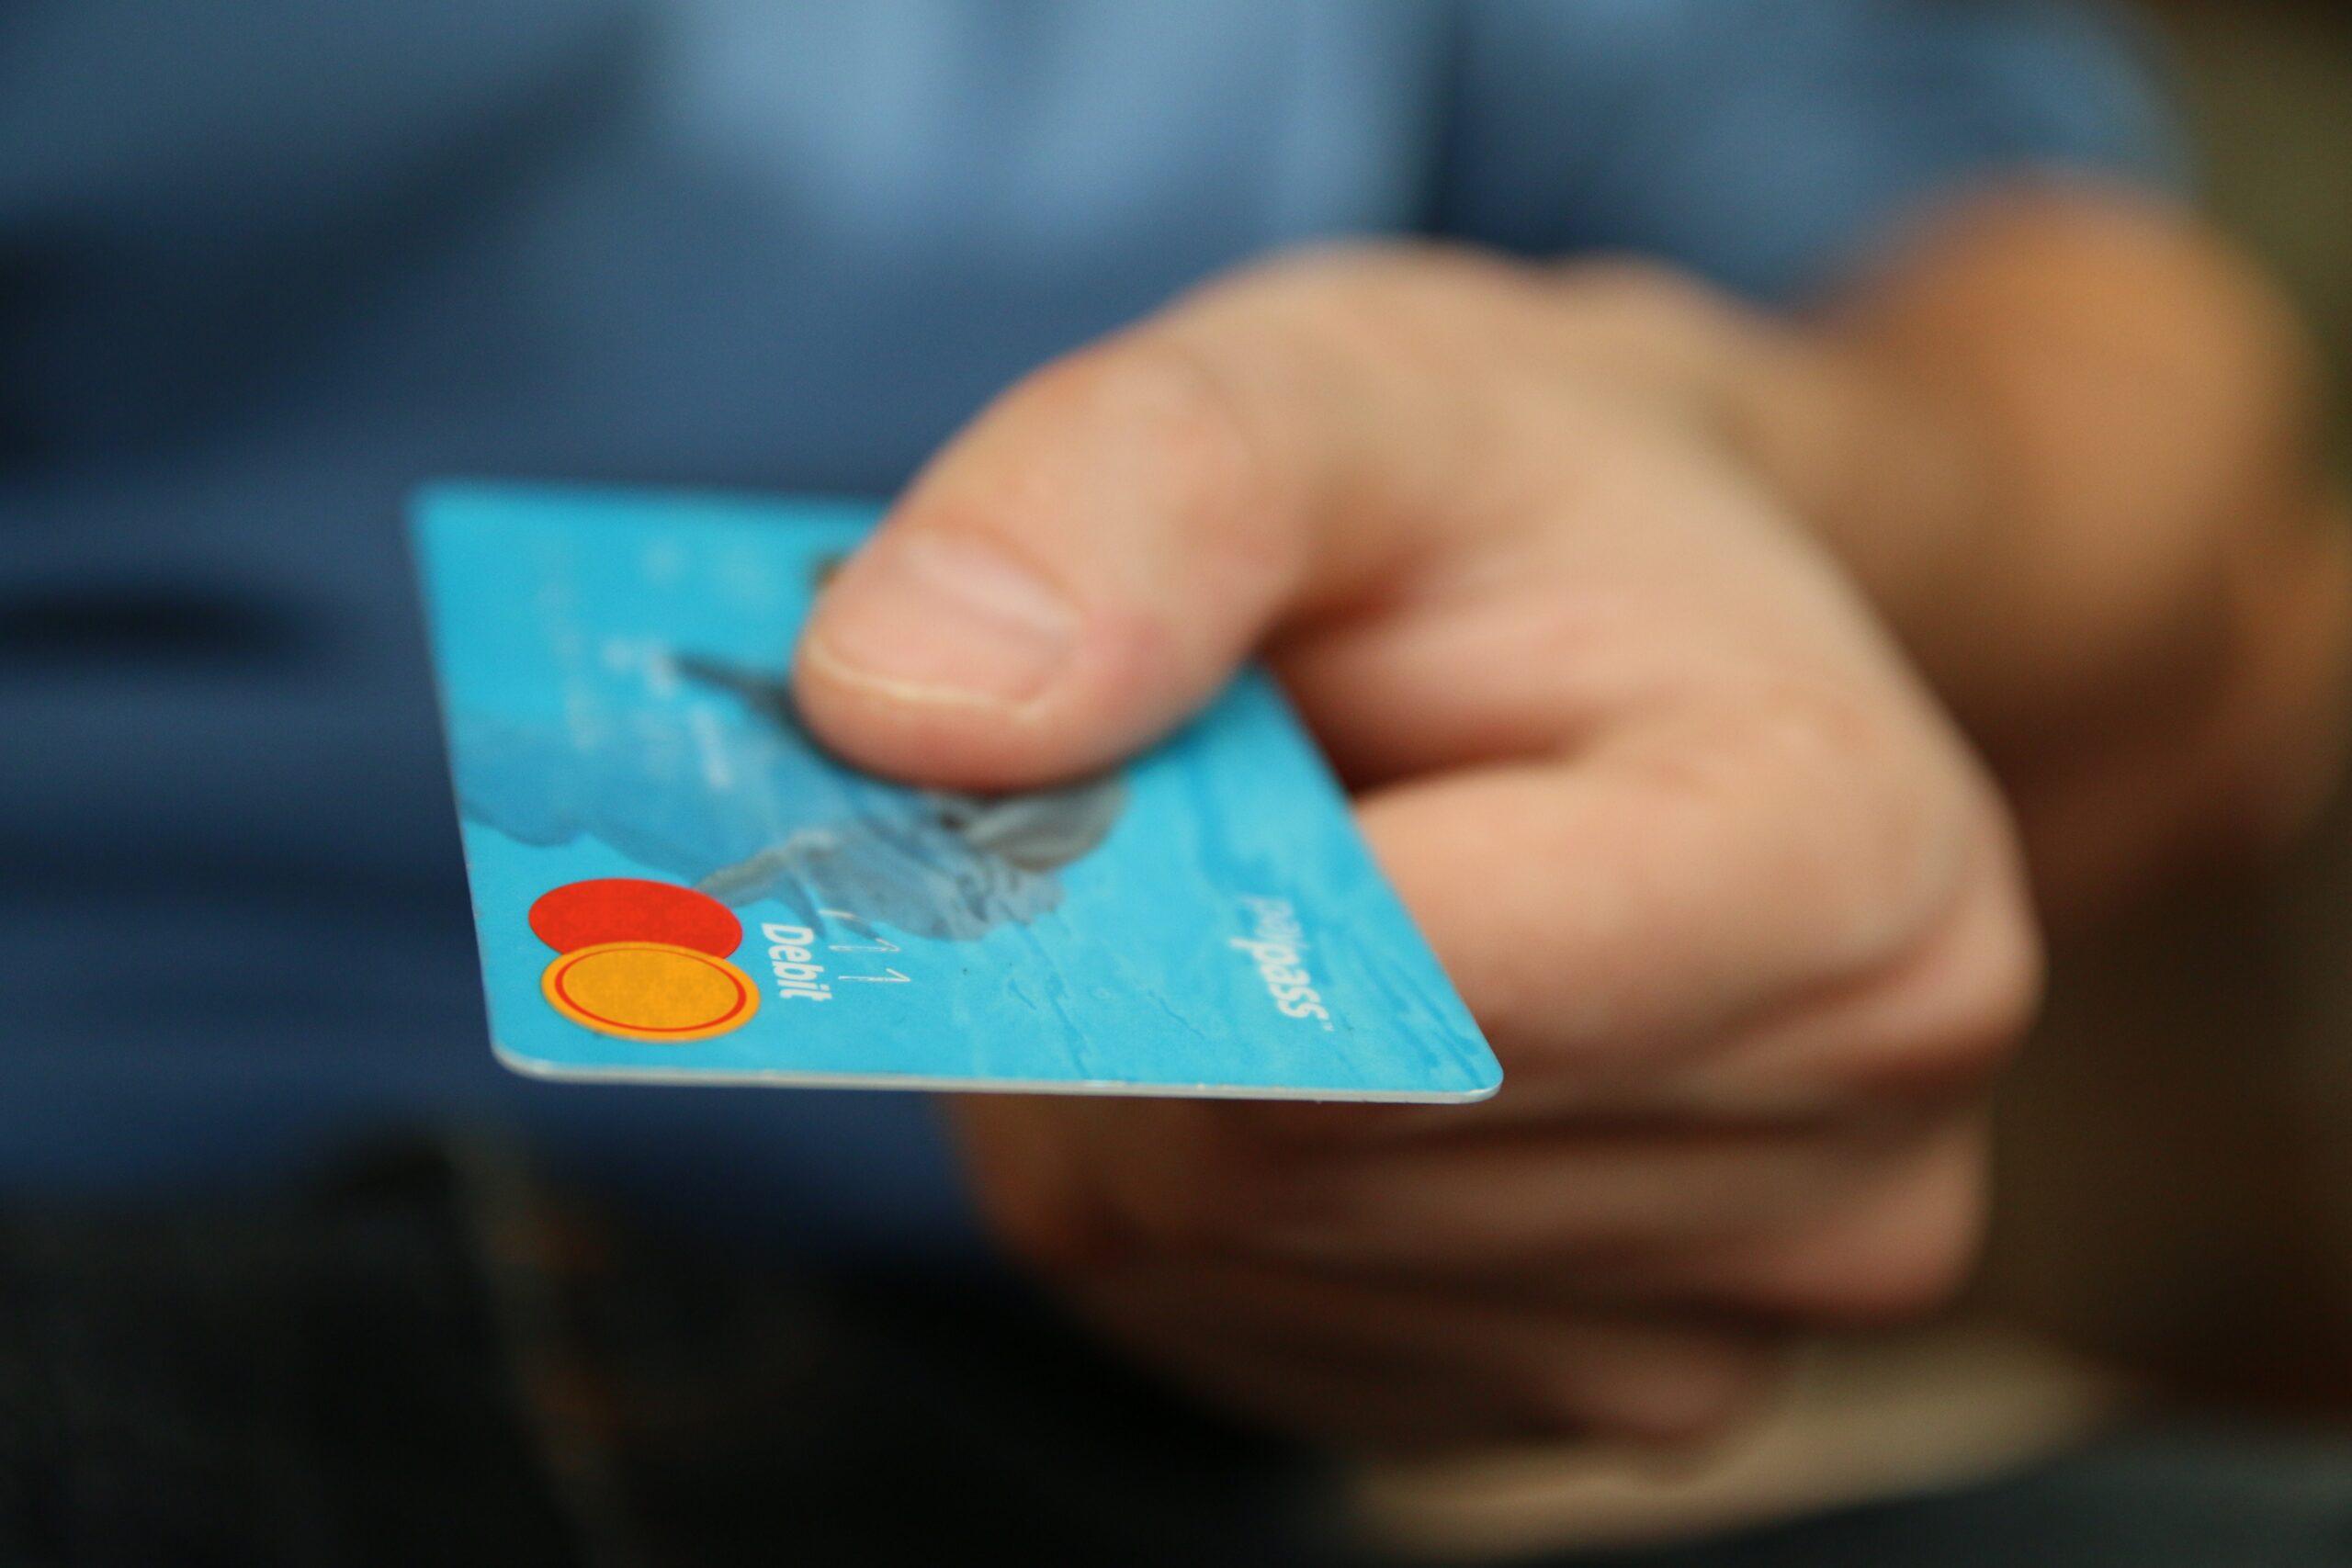 Top 5 Credit Cards for Online Shopping in Singapore 2023